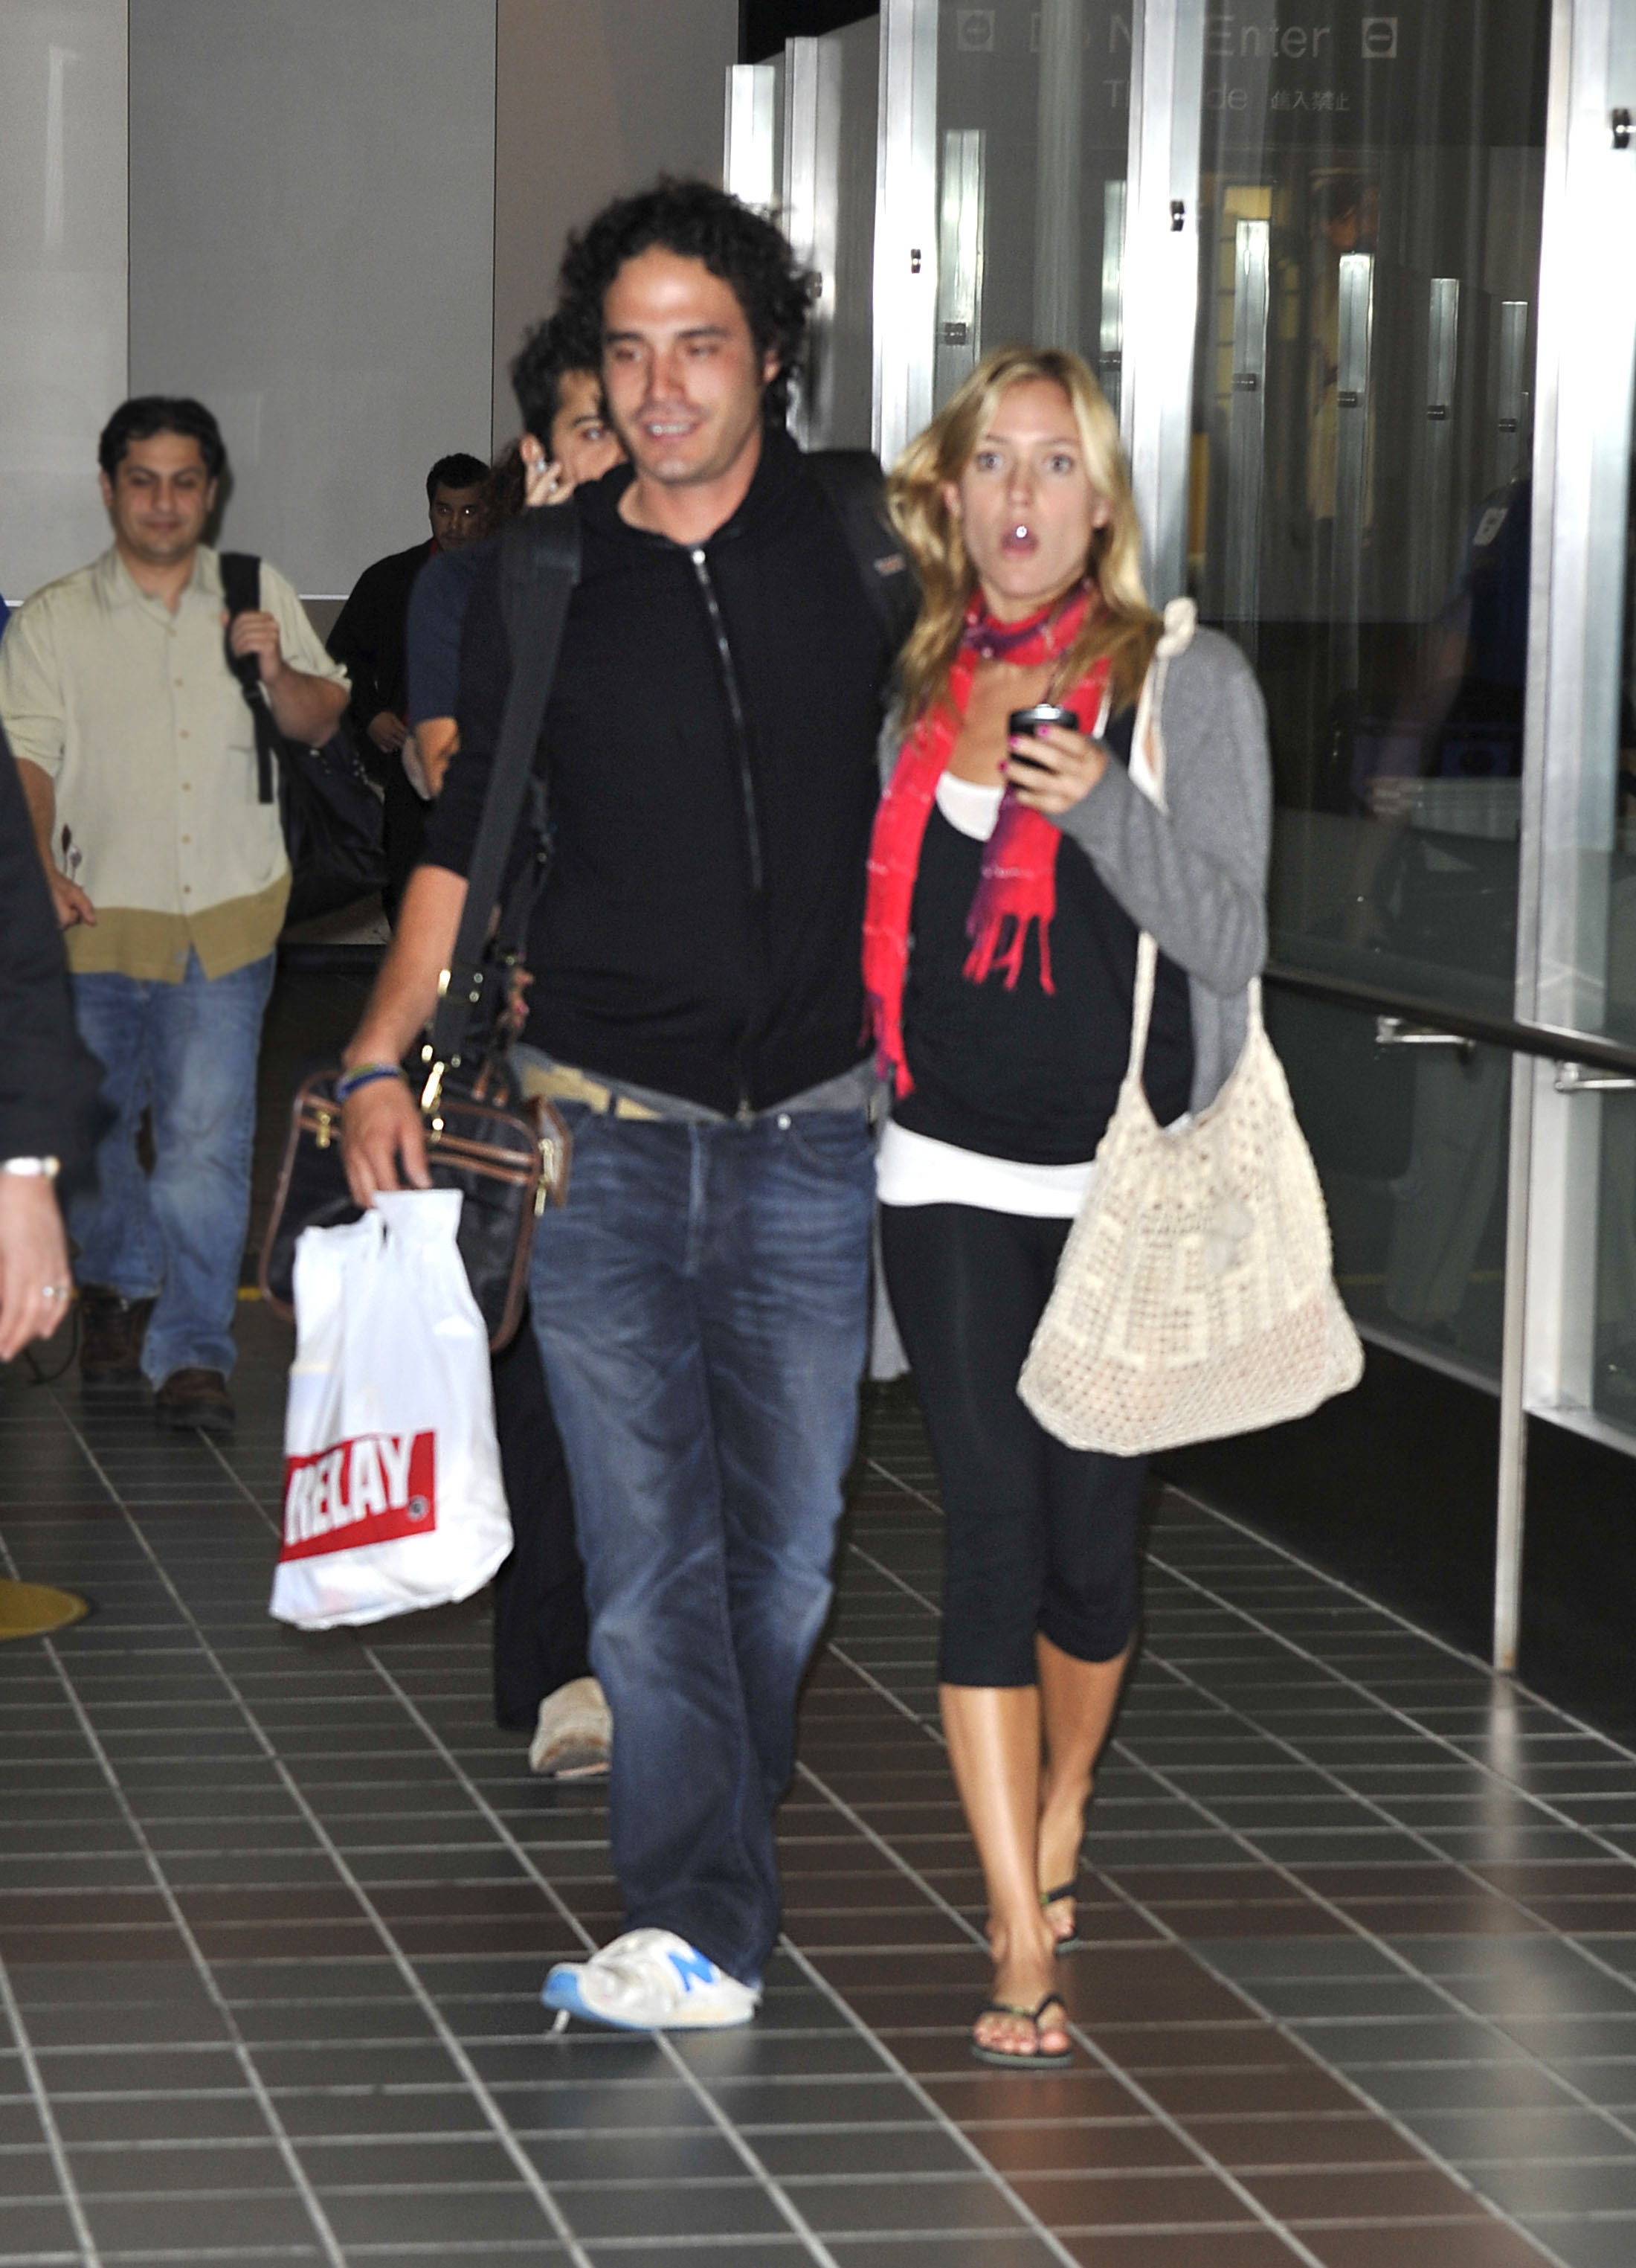 MIguel and Kristin leaving the airport together